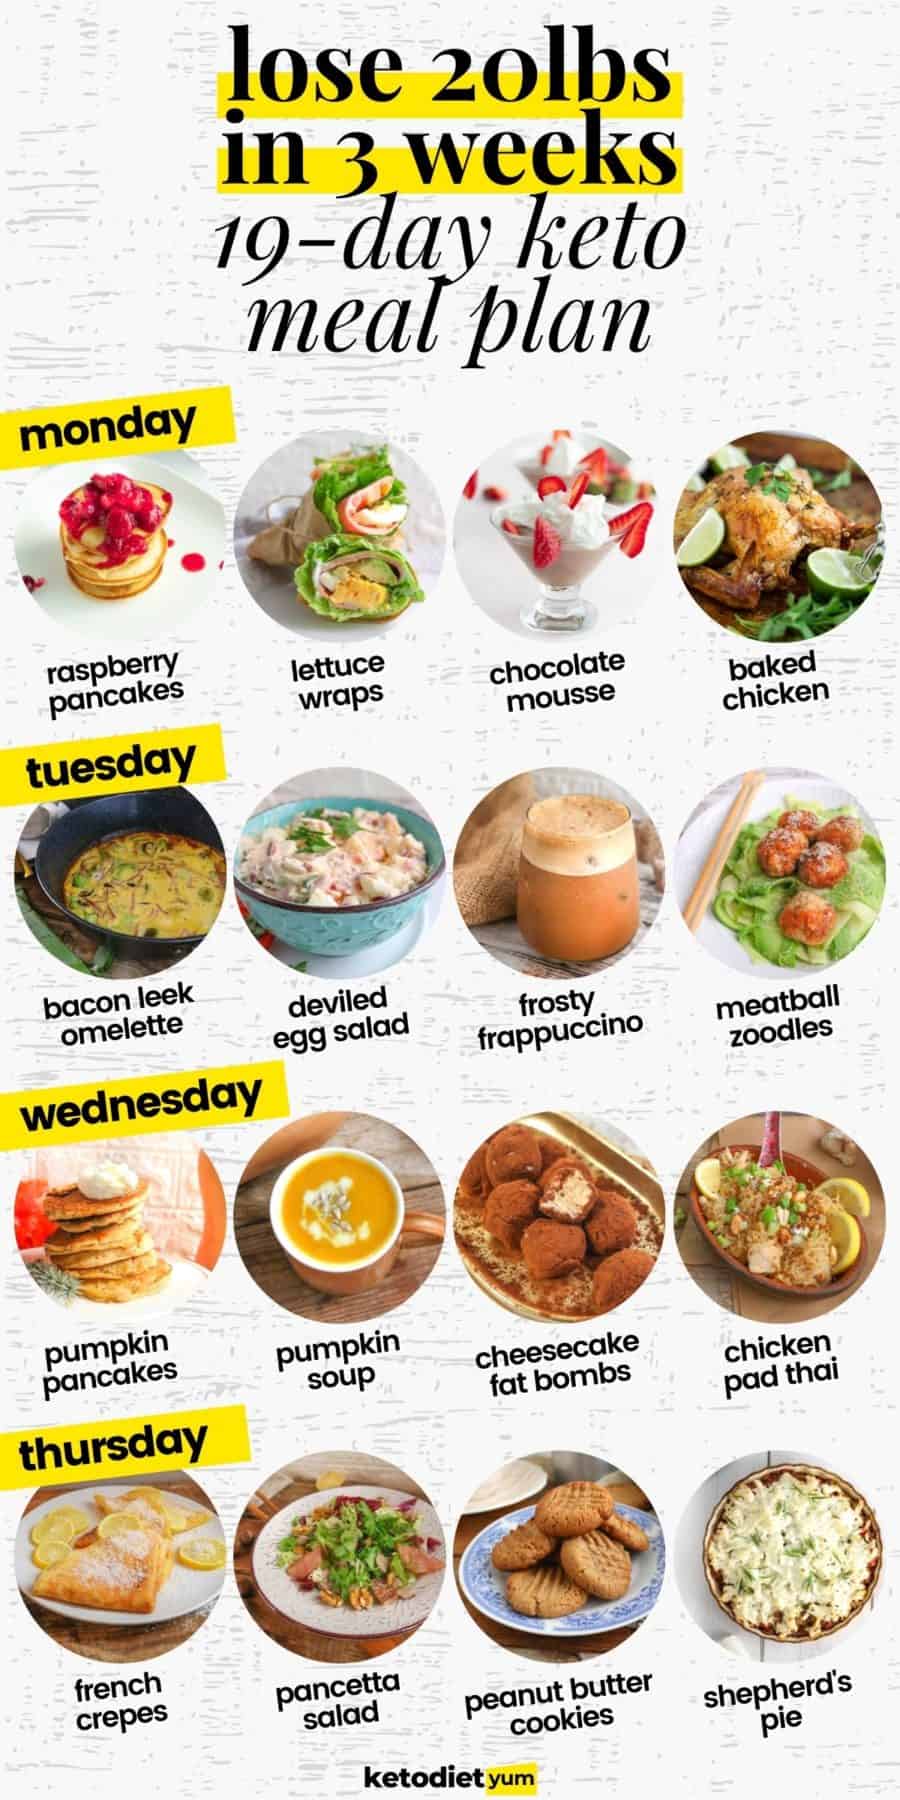 19-Day Keto Intermittent Fasting Meal Plan & Easy Recipes